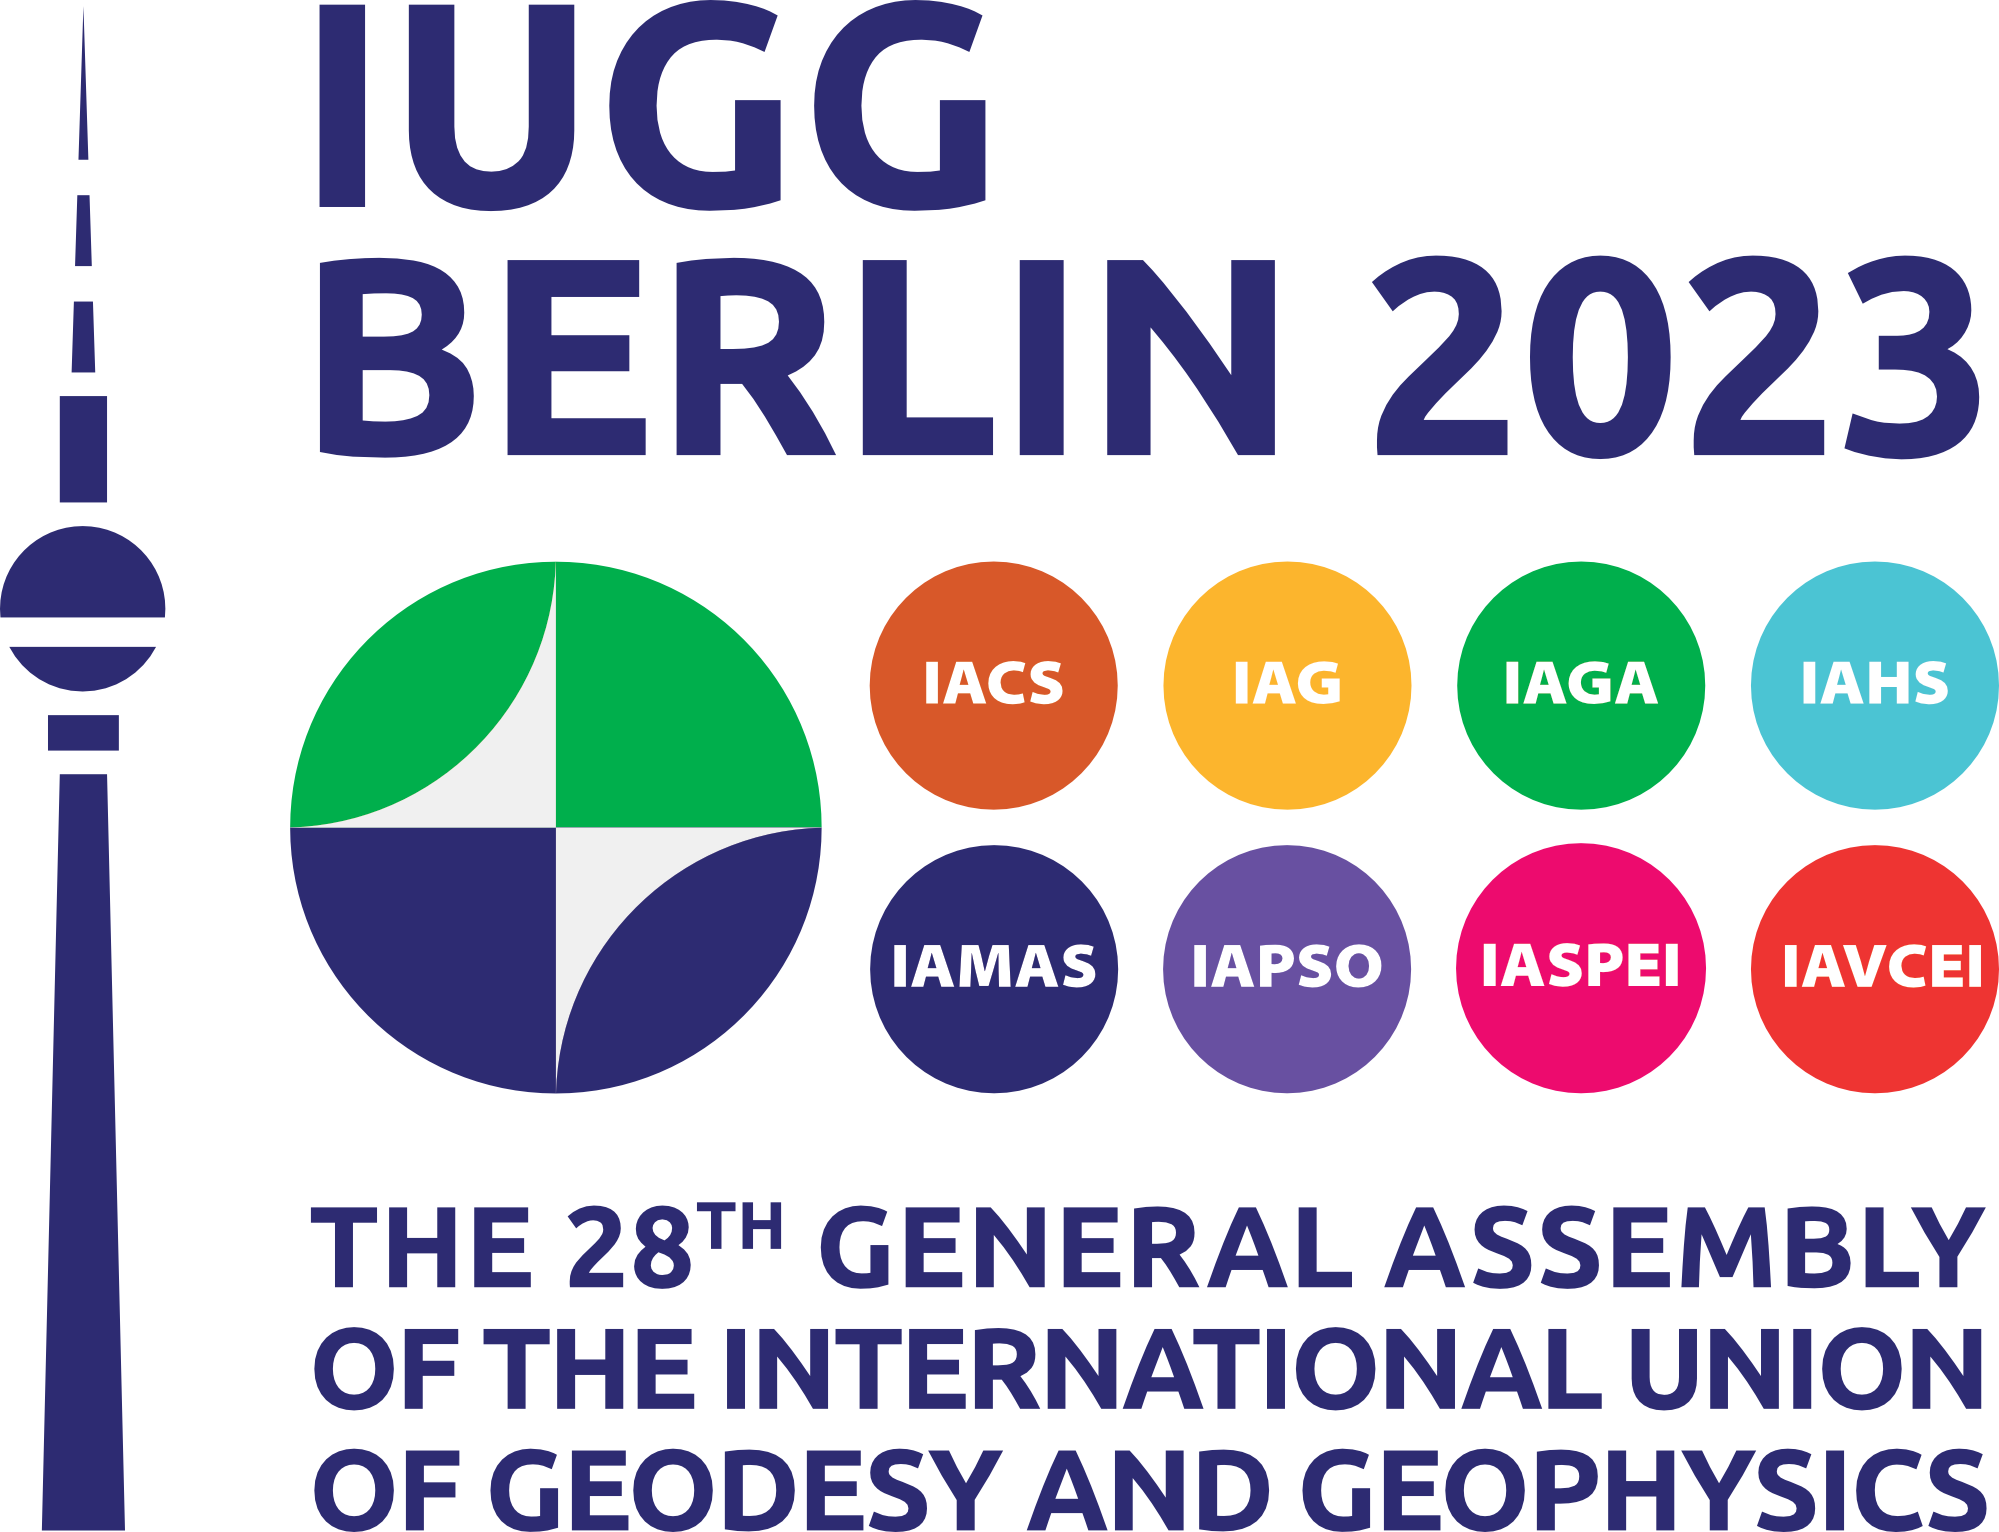 IUGG Berlin 2023 The 28th General Assembly of the International Union of Geodesy and Geophysics